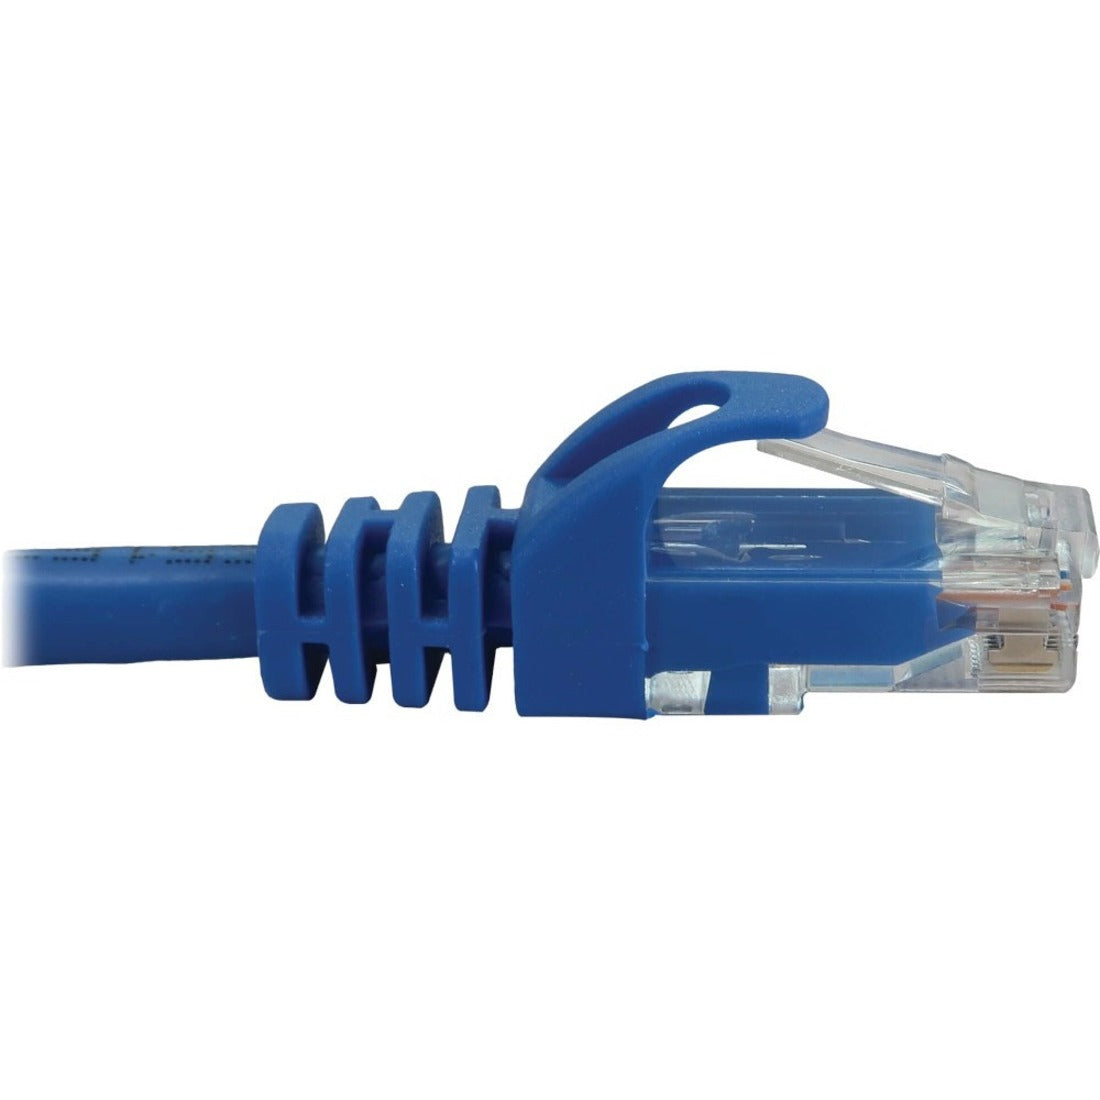 Tripp Lite N261-100-BL Cat.6a UTP Network Cable, 100ft Blue, 10G PoE, Snagless Molded